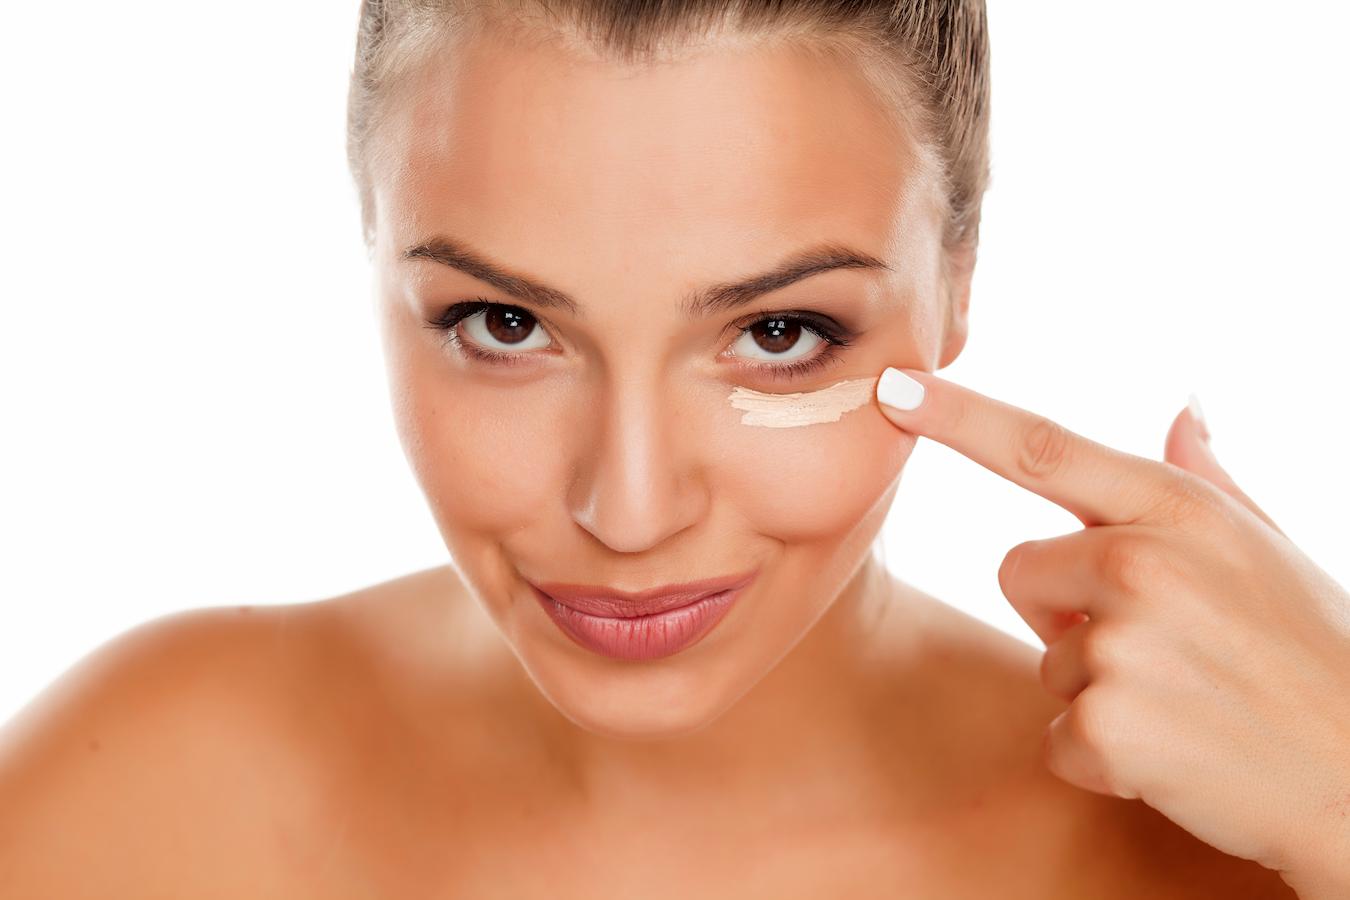 Want a magic eraser for your face then go through this list of concealers for mature skin and find the perfect fit for you